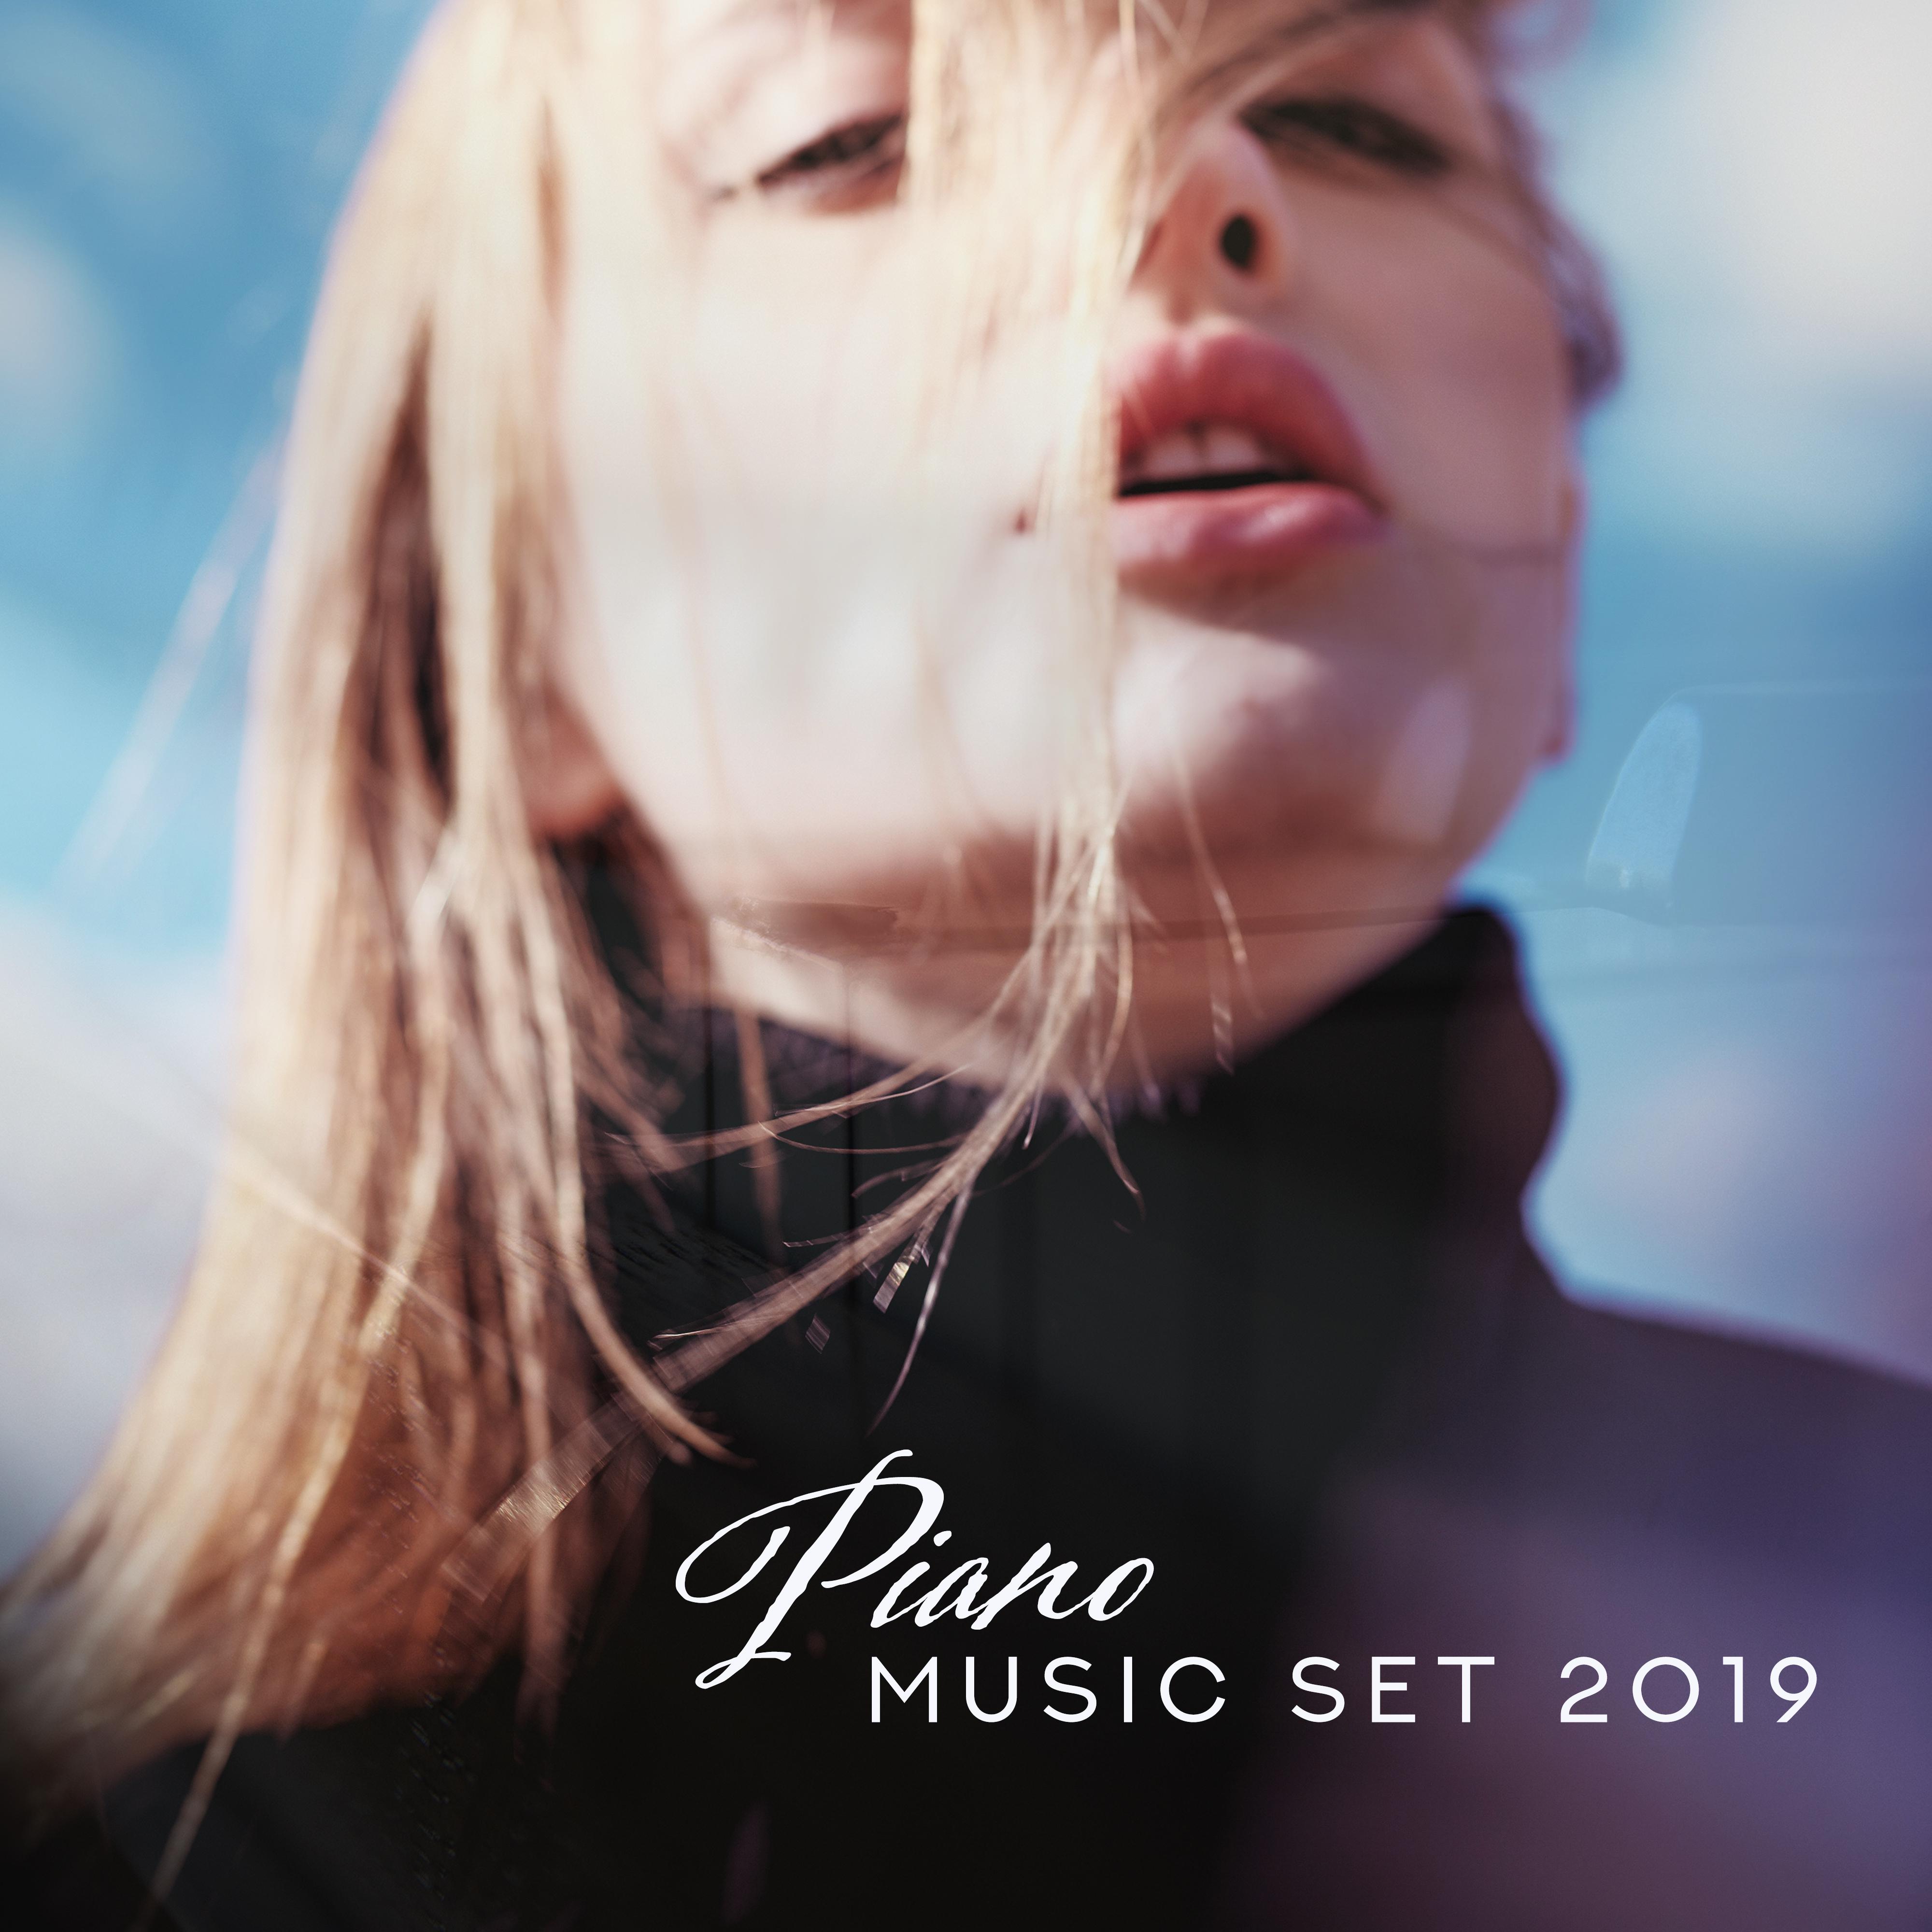 Piano Music Set 2019 – Relaxing Jazz for Coffee, Restaurant, Rest & Relaxation, Smooth Music Reduces Stress, Relax After Work, Ambient Piano Collection 2019